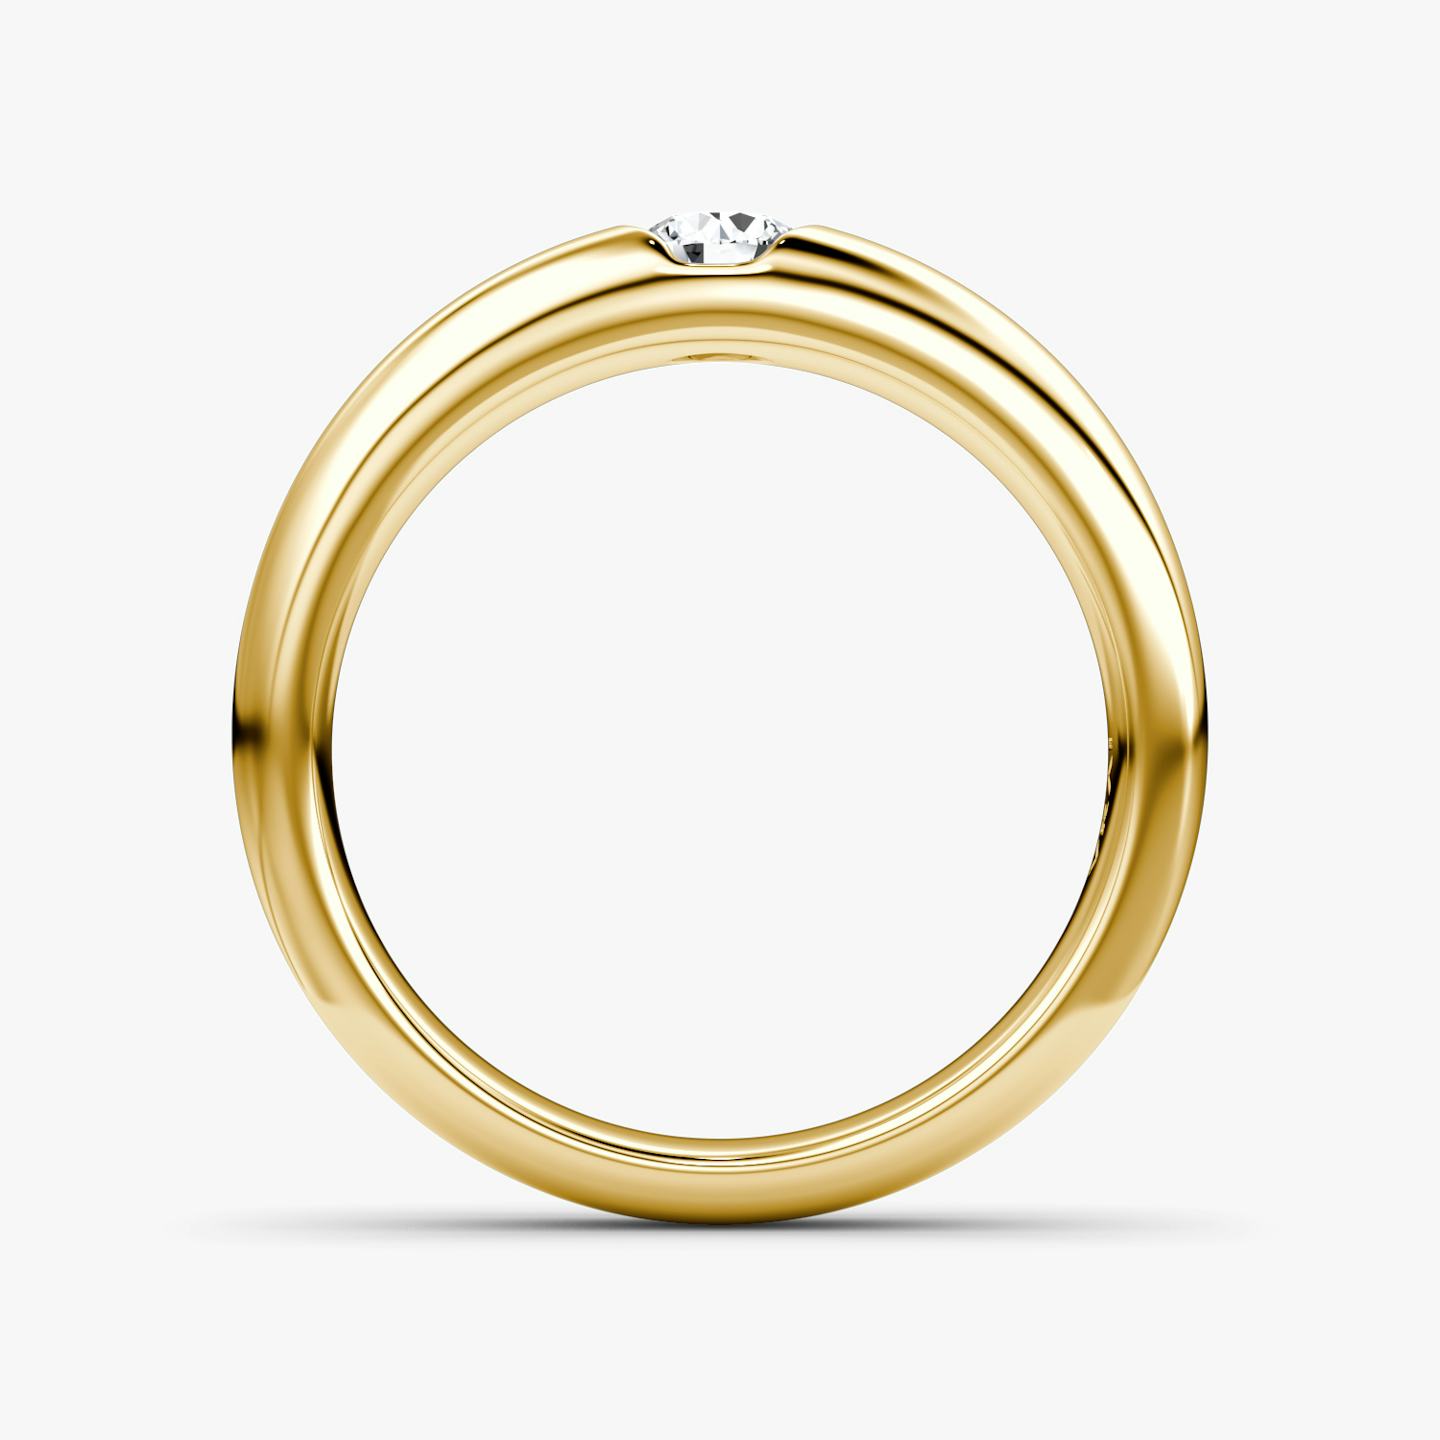 The Round Inlay Band | Round Brilliant | 18k | 18k Yellow Gold | Version: Large